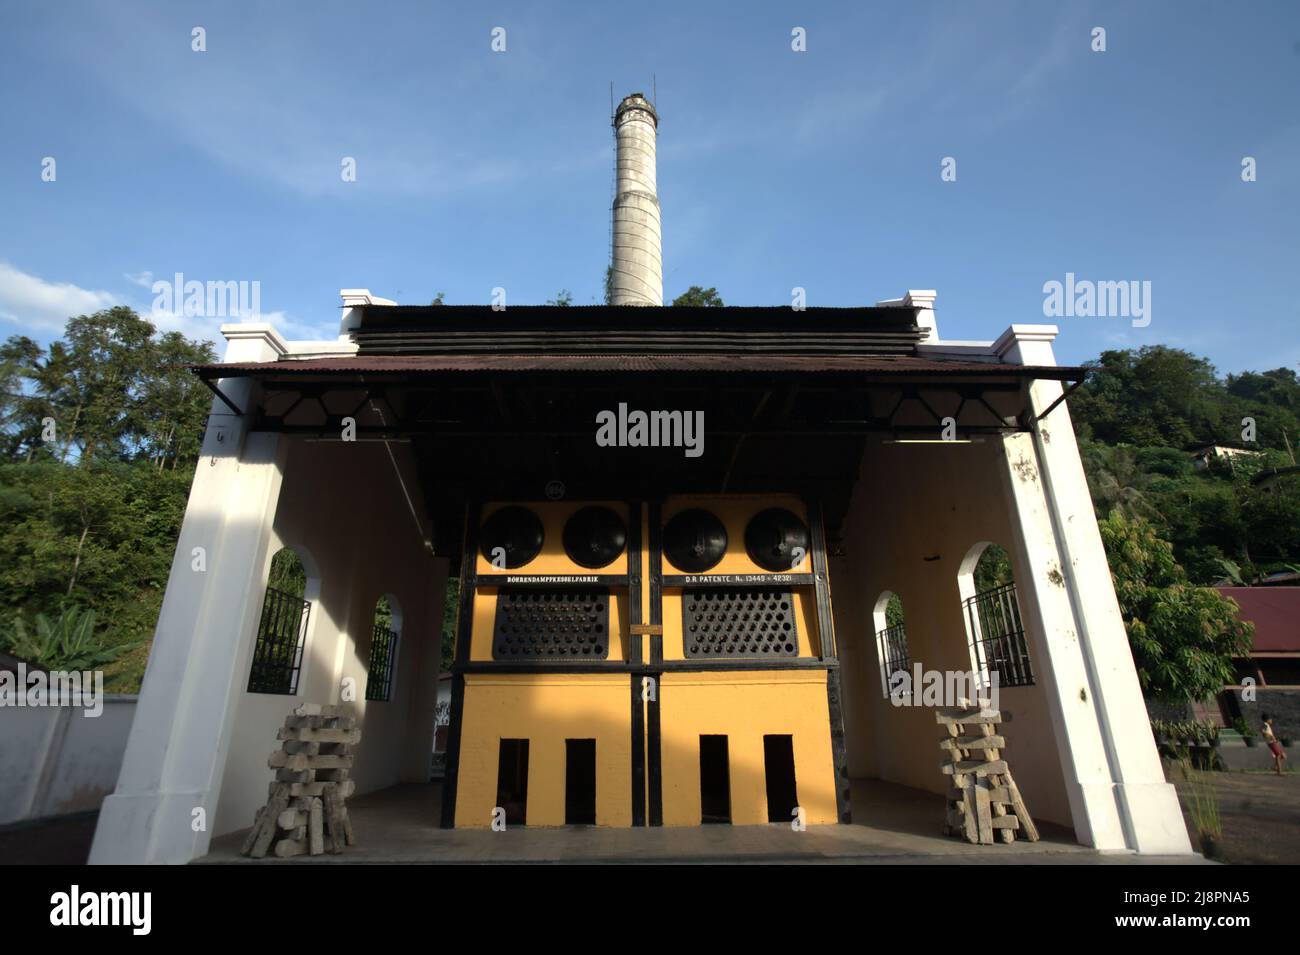 Coal-fired steam generators at Museum Goedang Ransoem used for cooking during colonial coal mining operation in Sawahlunto, a former coal-mining town established by Dutch colonialists in late 19th century in West Sumatra, Indonesia. Stock Photo